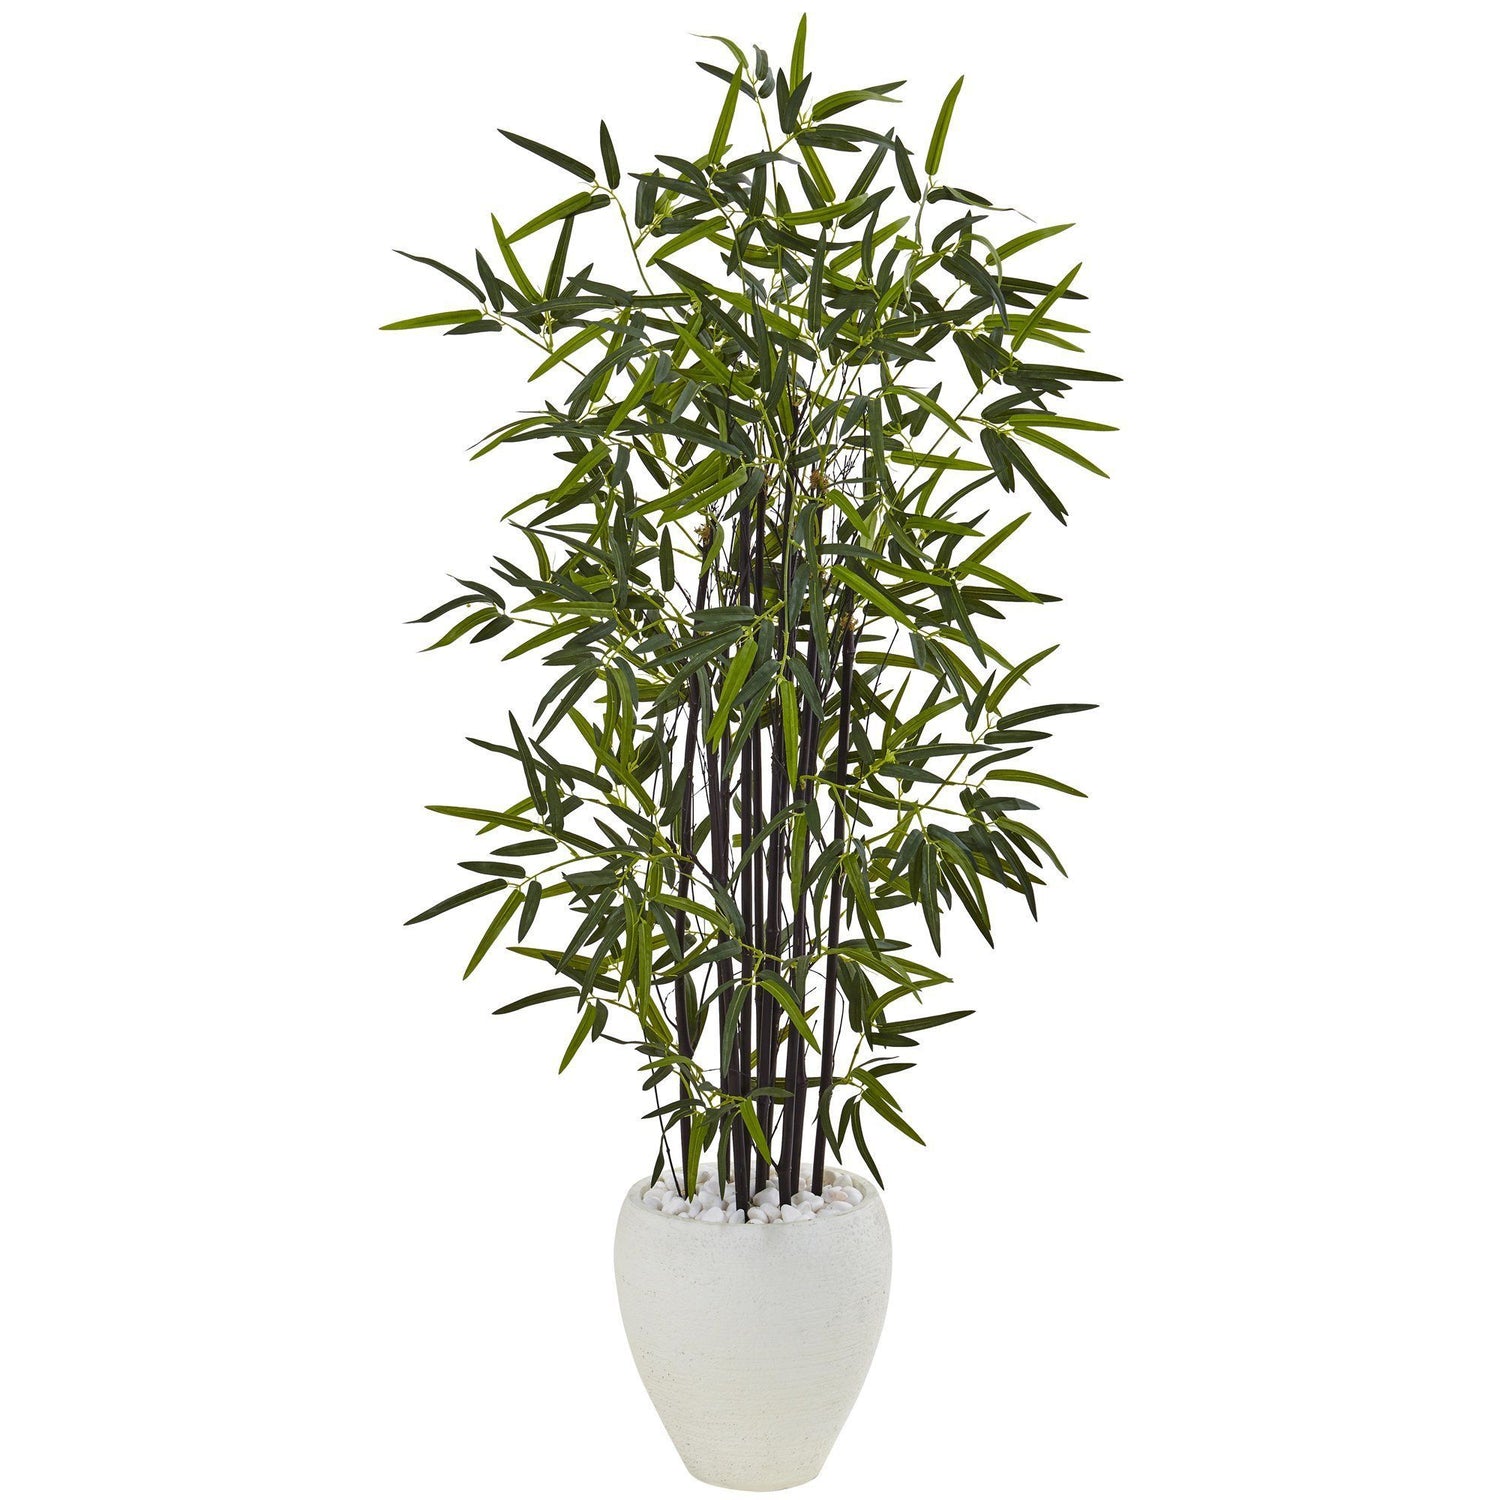 5’ Black Bamboo Tree in White Oval Planter